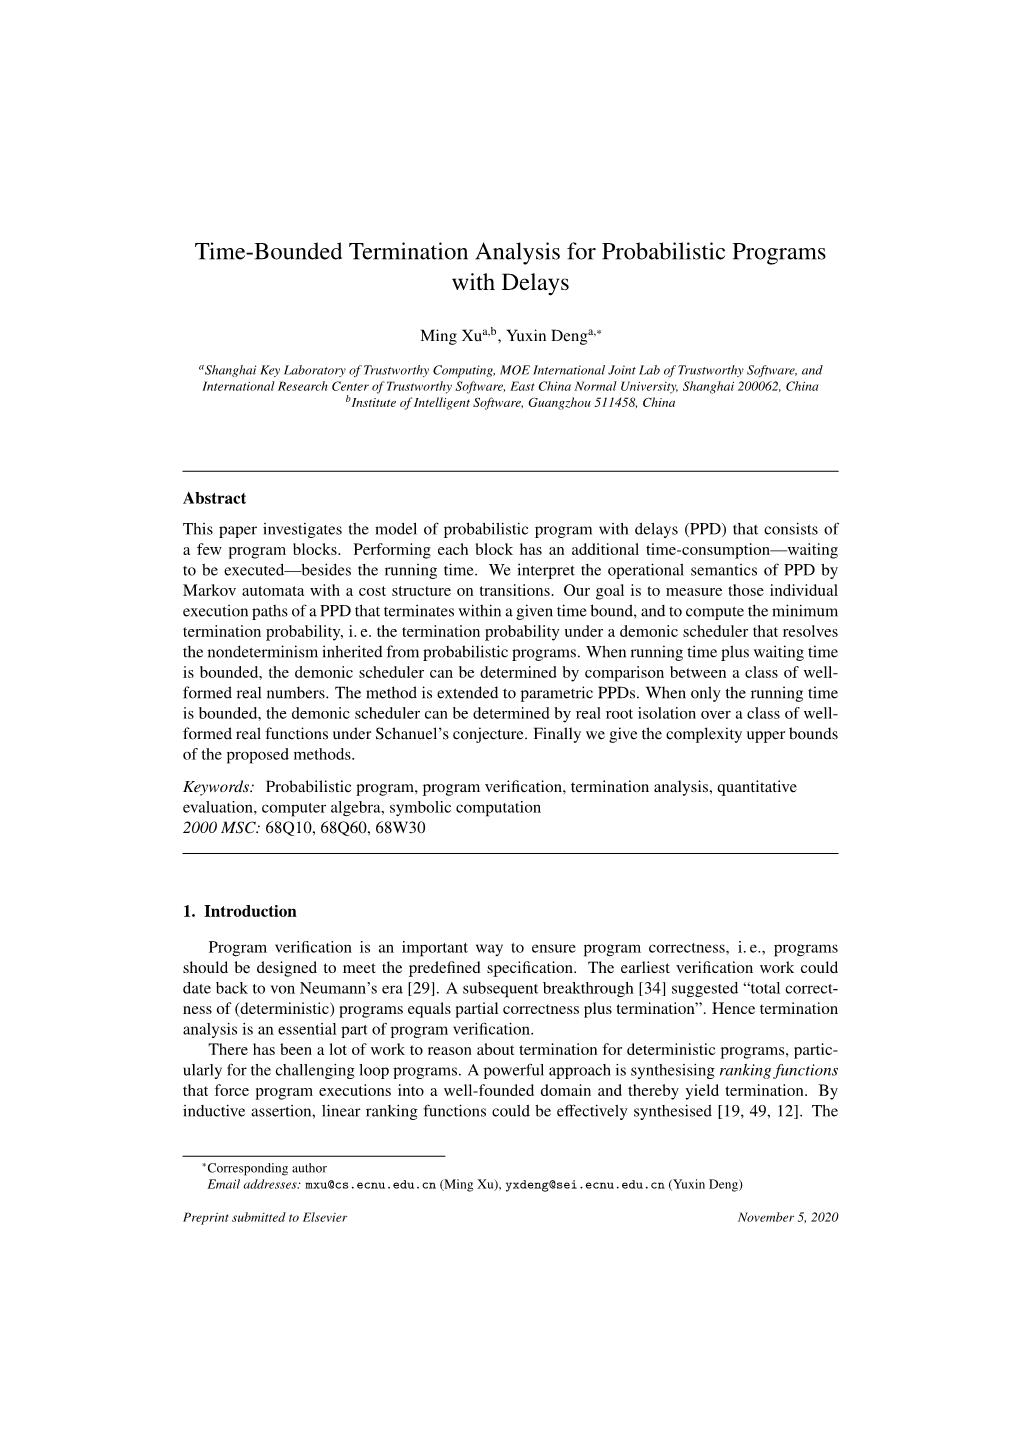 Time-Bounded Termination Analysis for Probabilistic Programs with Delays